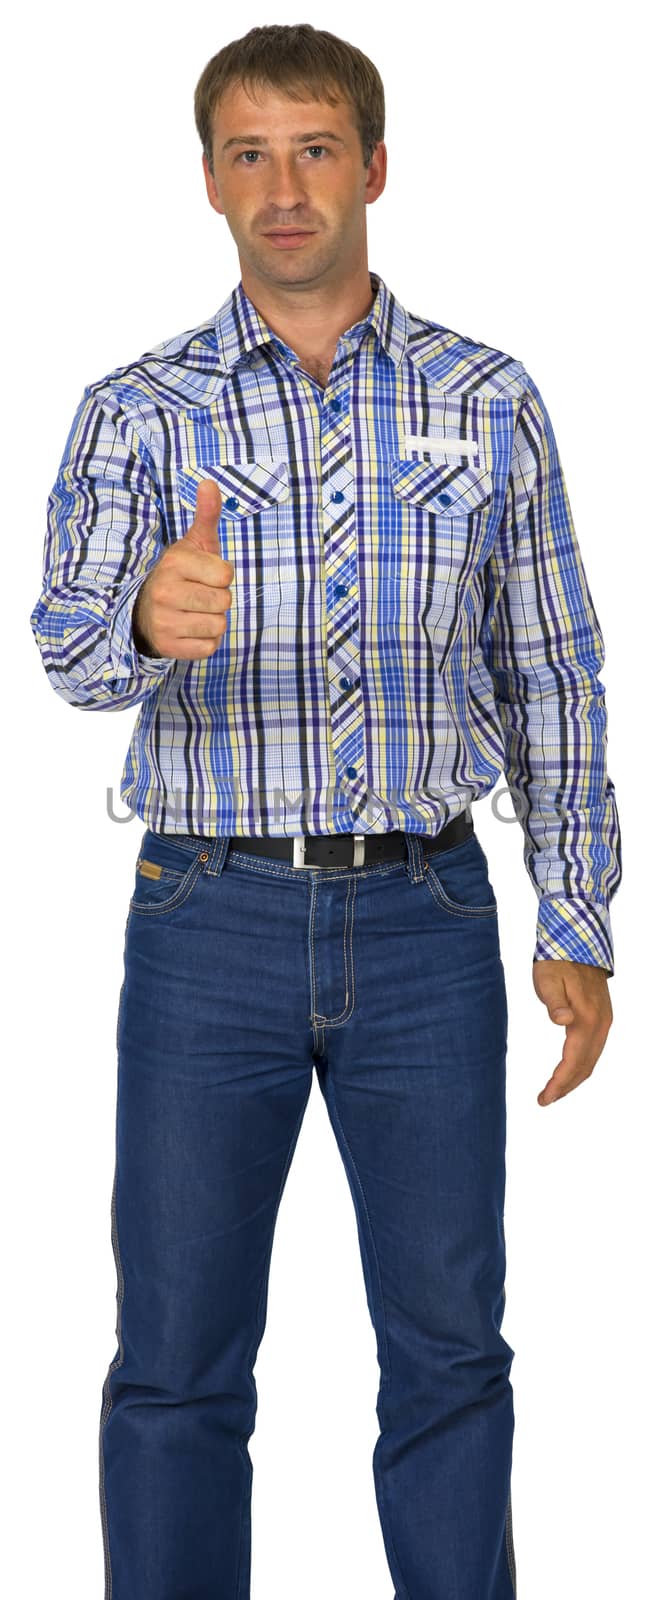 Portrait of young man showing thumb up. white background